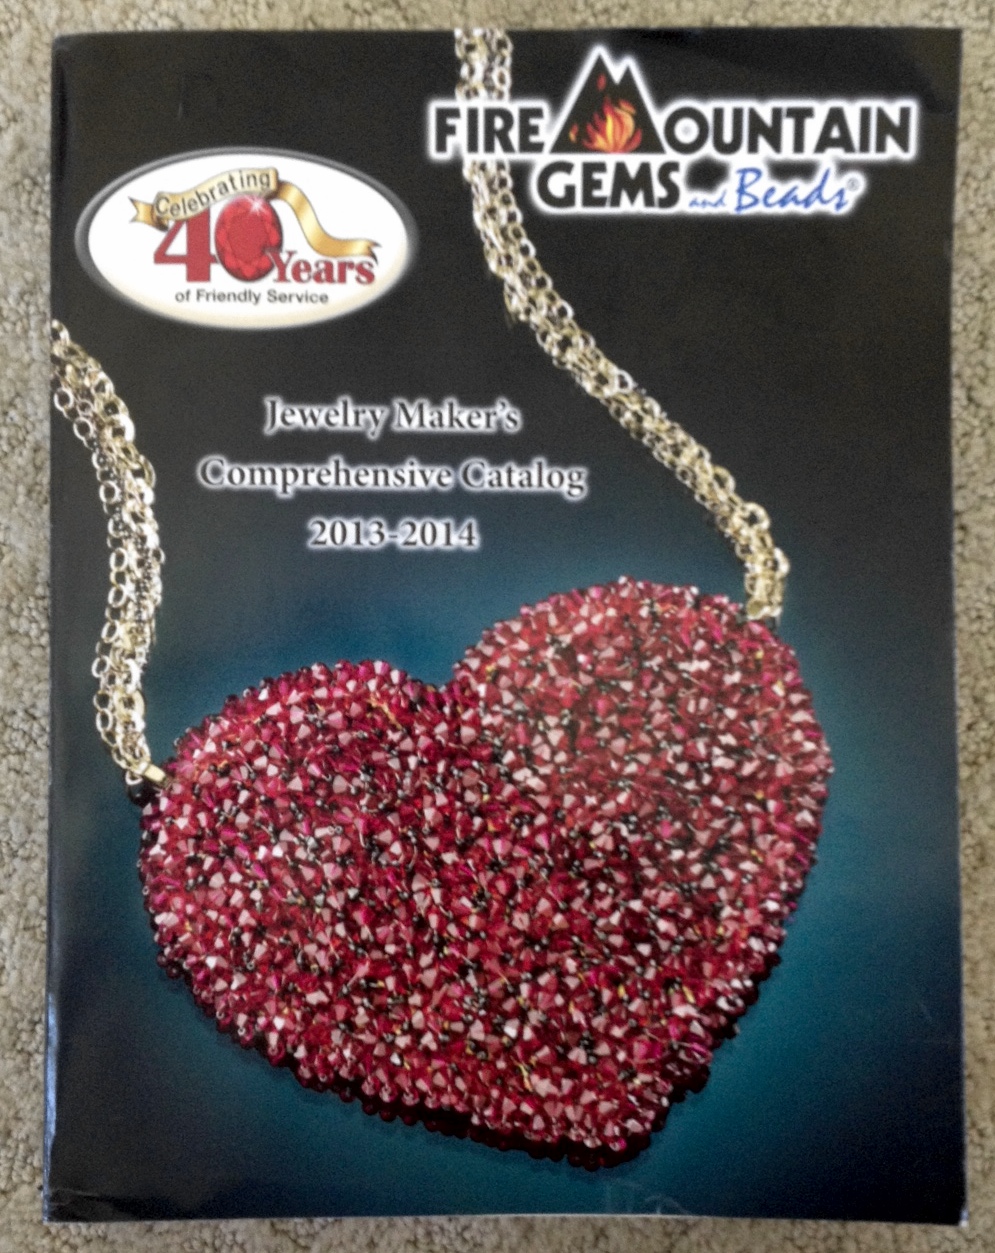 Jewelry Making Article - Everything You Need to Know About Jeweler's Saws -  Fire Mountain Gems and Beads